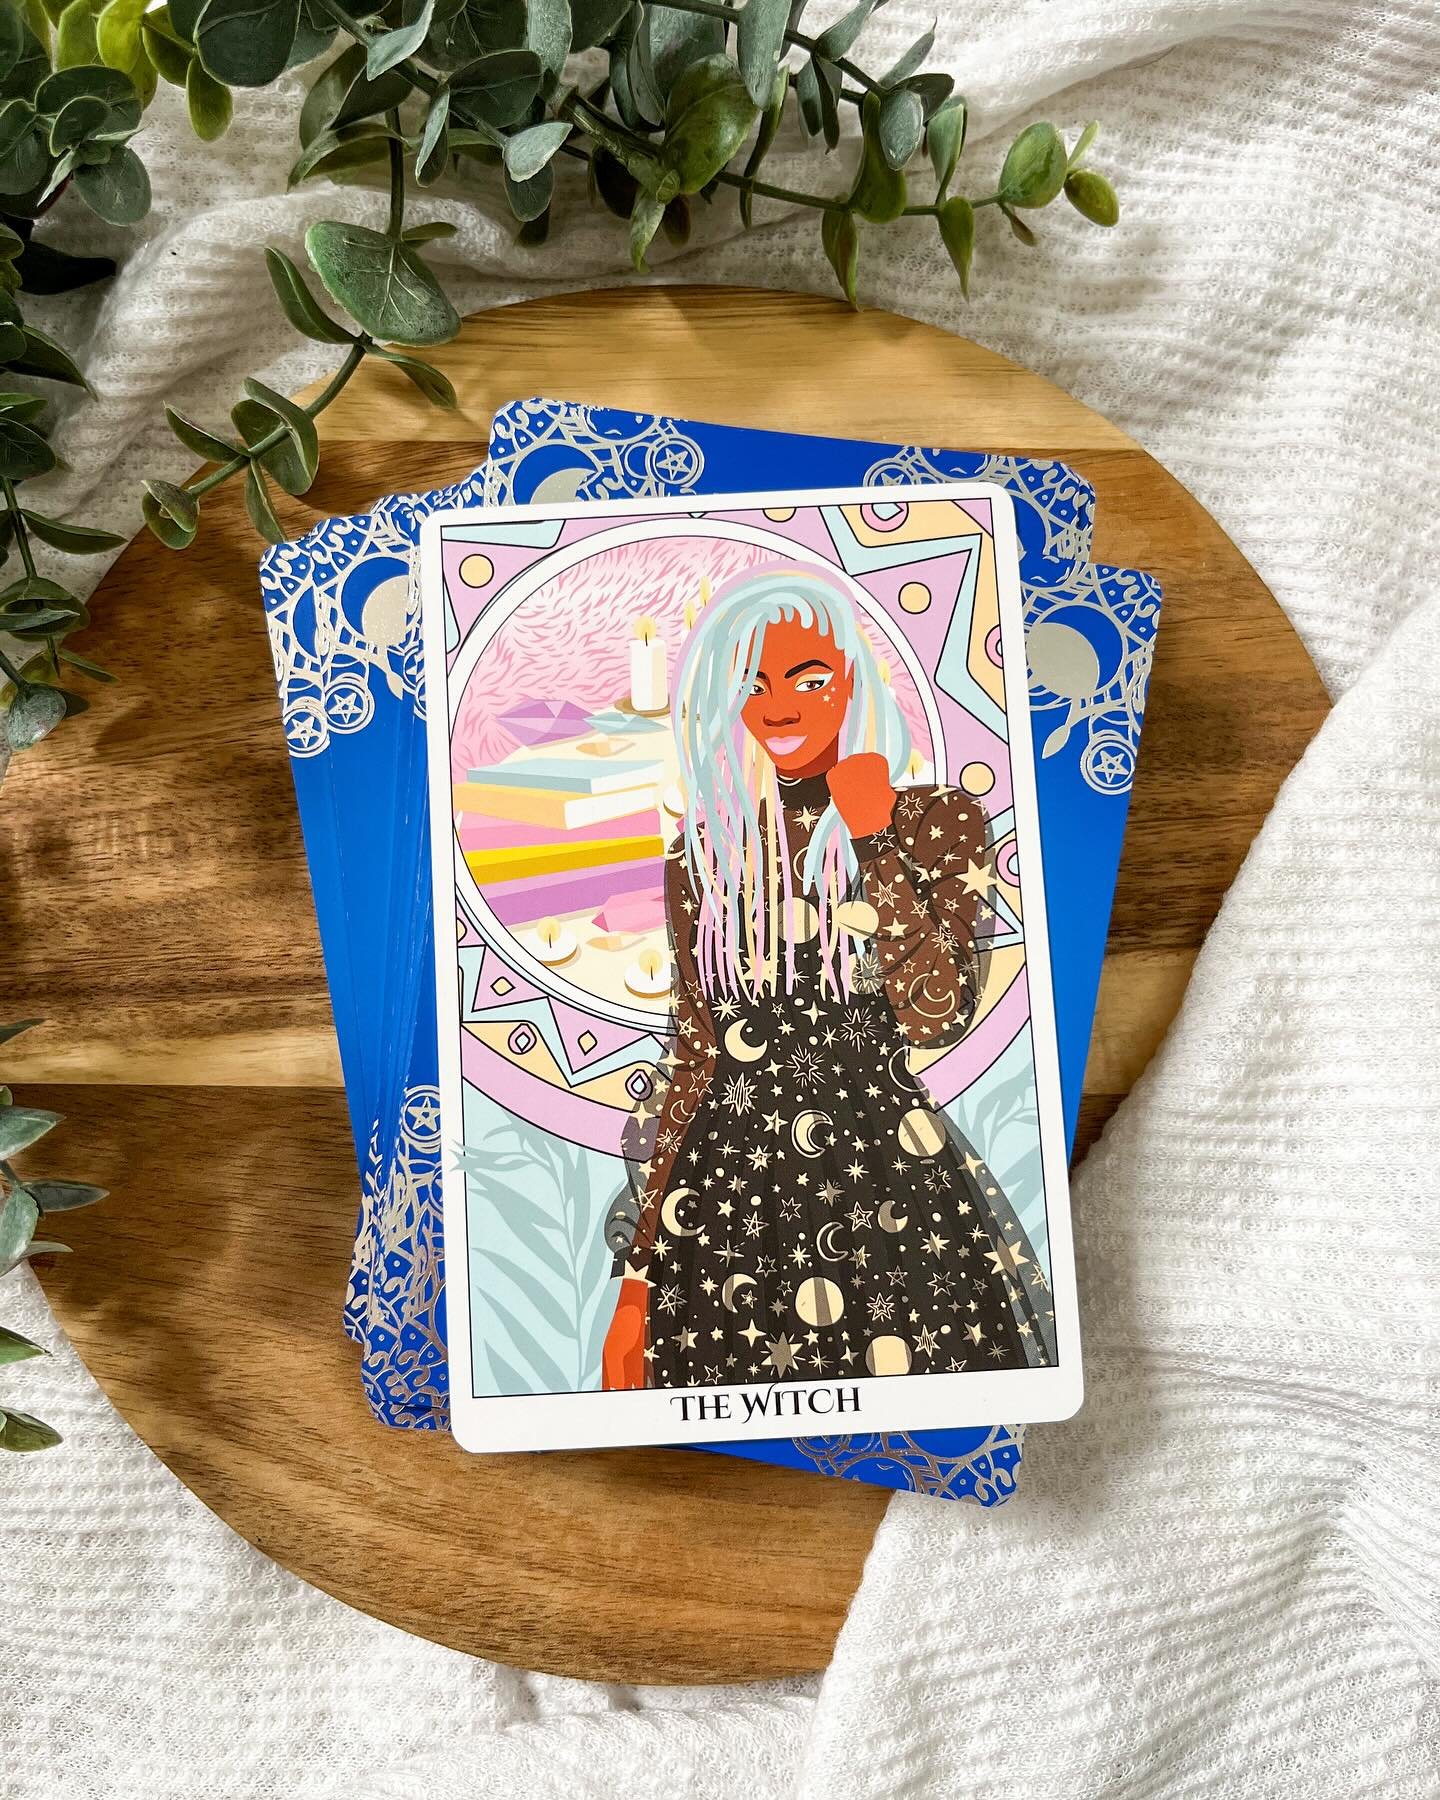 It&rsquo;s been a bit since I&rsquo;ve done a card pull for you all. I got this new deck recently &amp; it needs to be shared!  If you head to the blog - there is a new post about it too!

Today&rsquo;s message comes from The Witch.&nbsp; 

It is a r